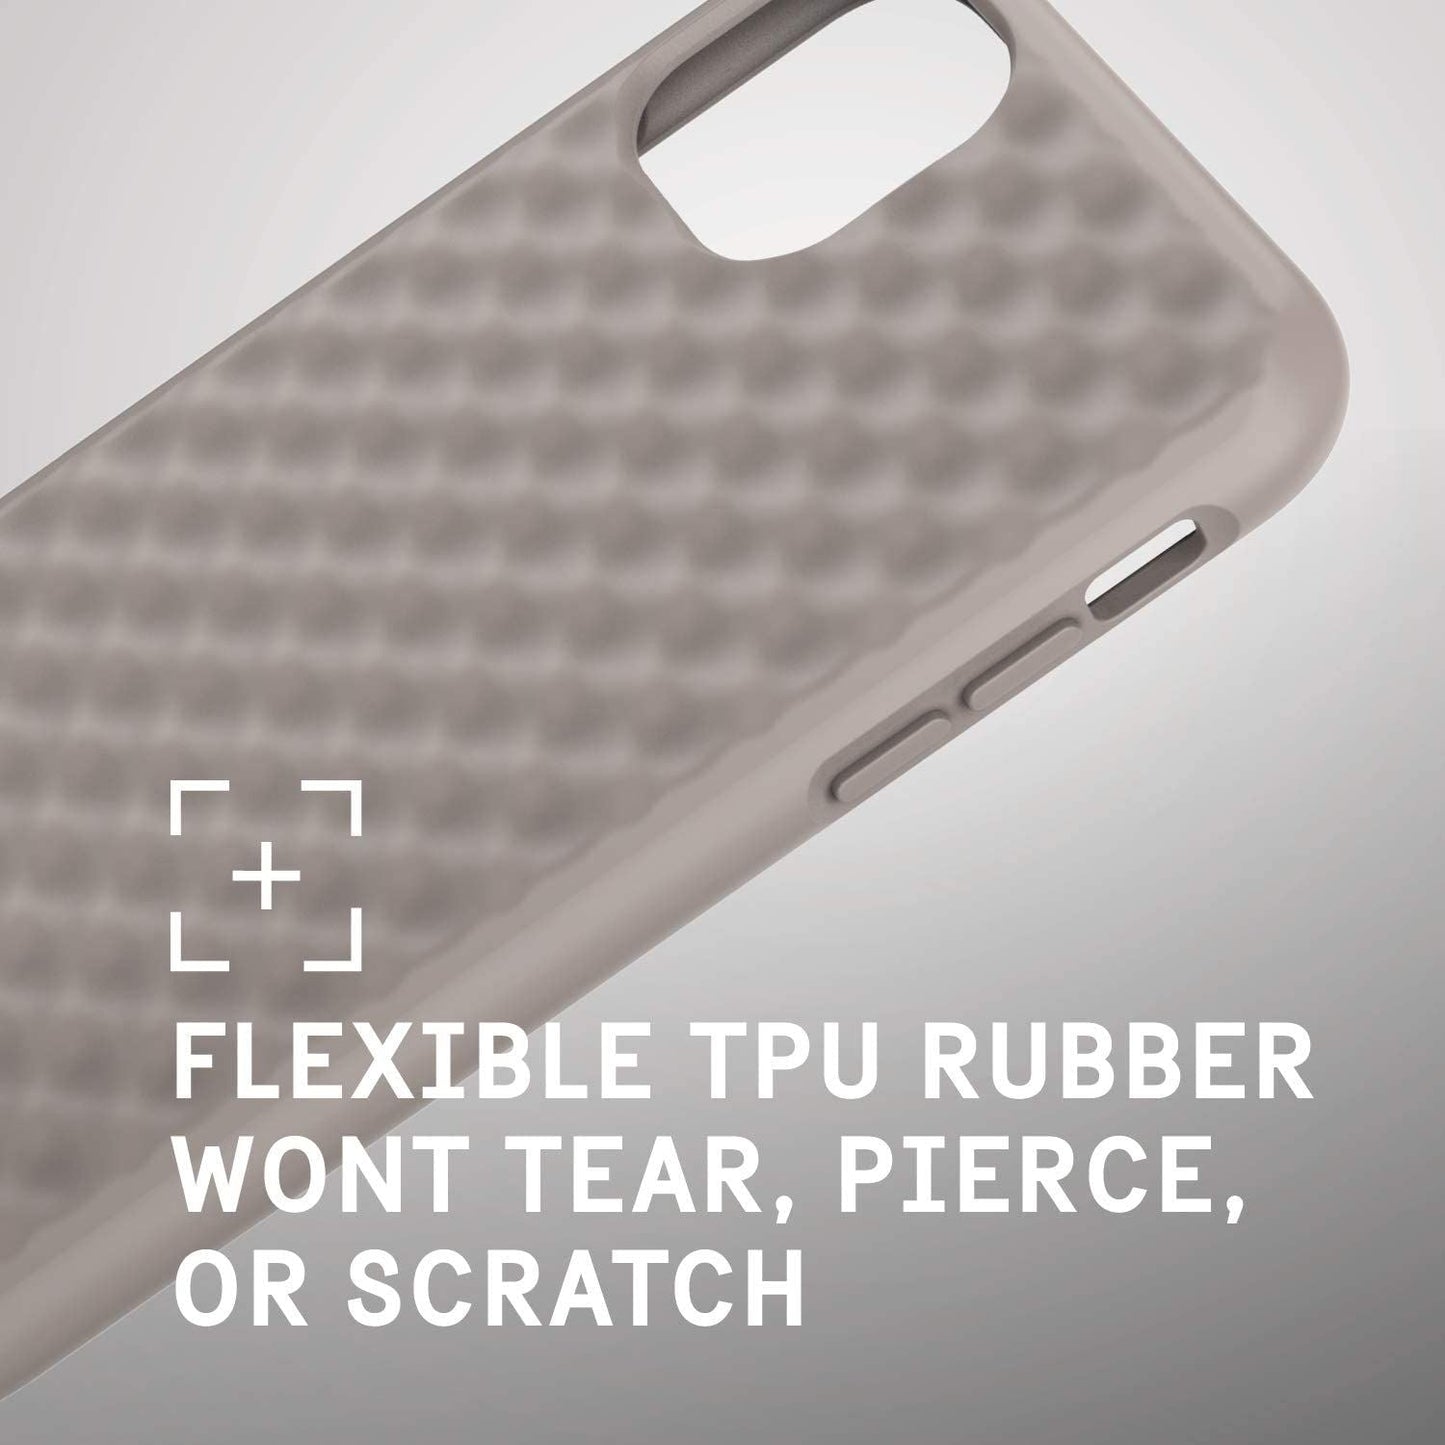 iPhone 11 Pro Max + XS Max Waffle Cover (Two Colors)